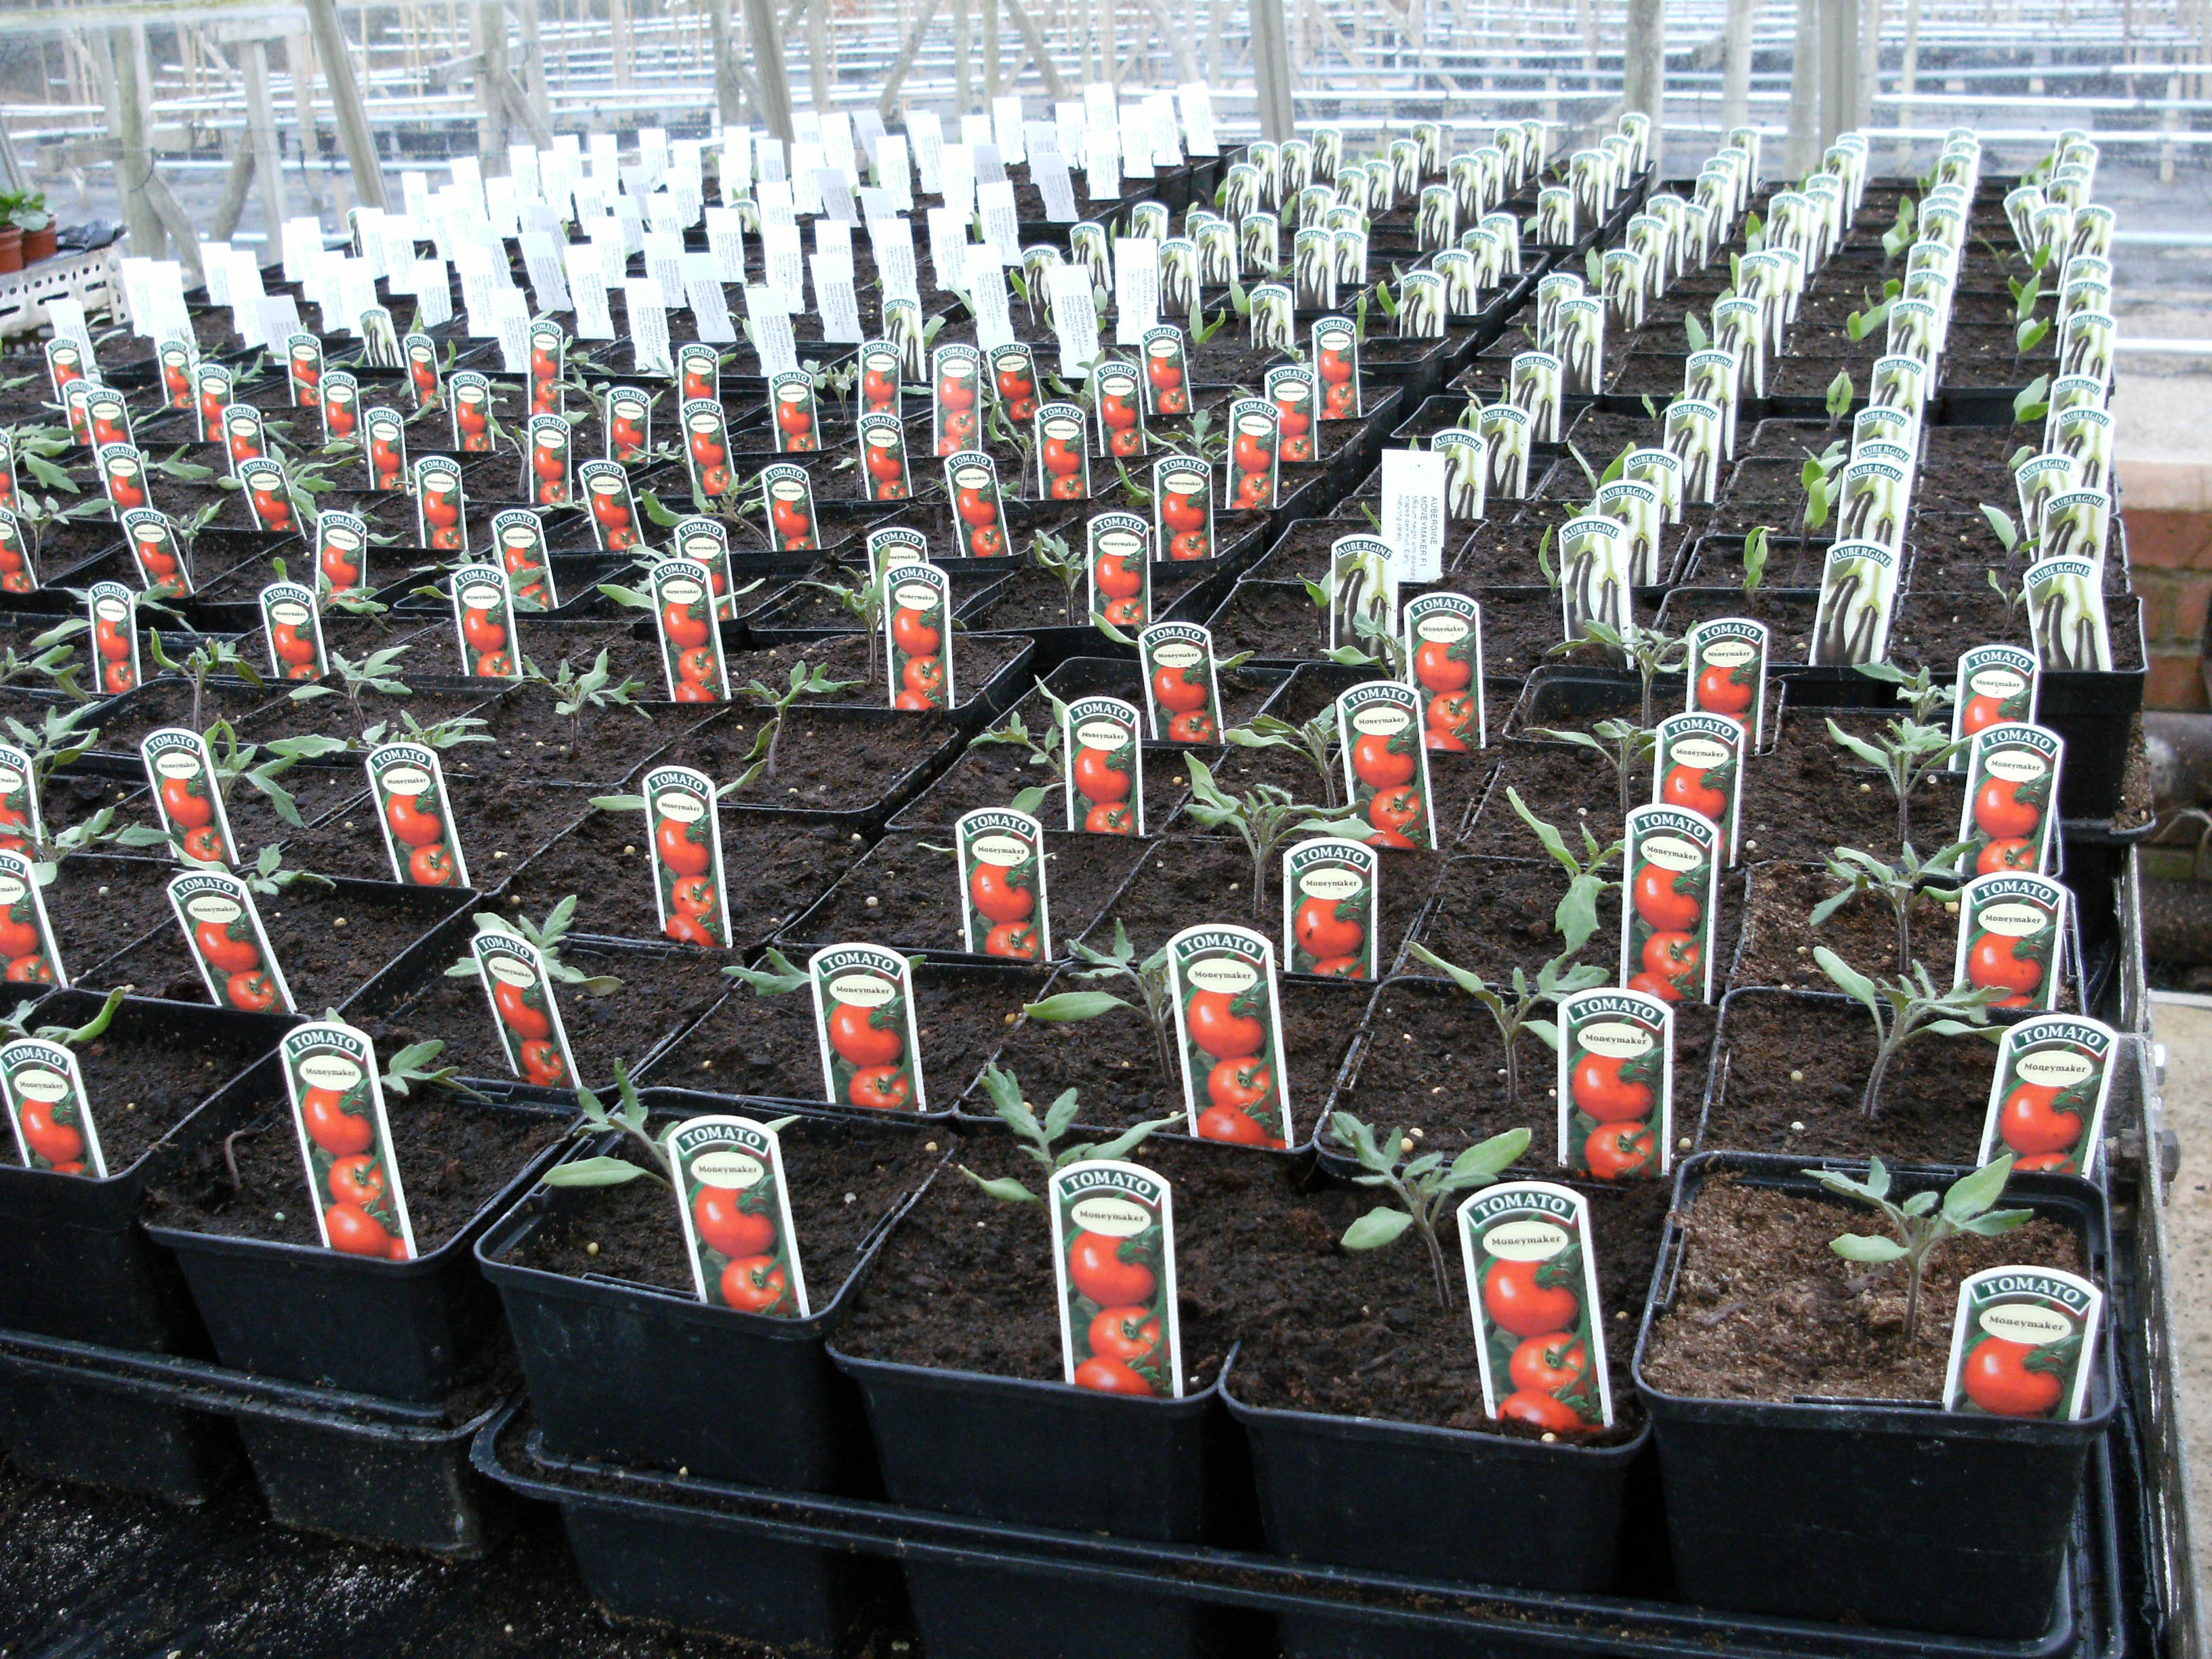 Rows of tomato seeds being grown into tomato plants for sale in the garden centres.